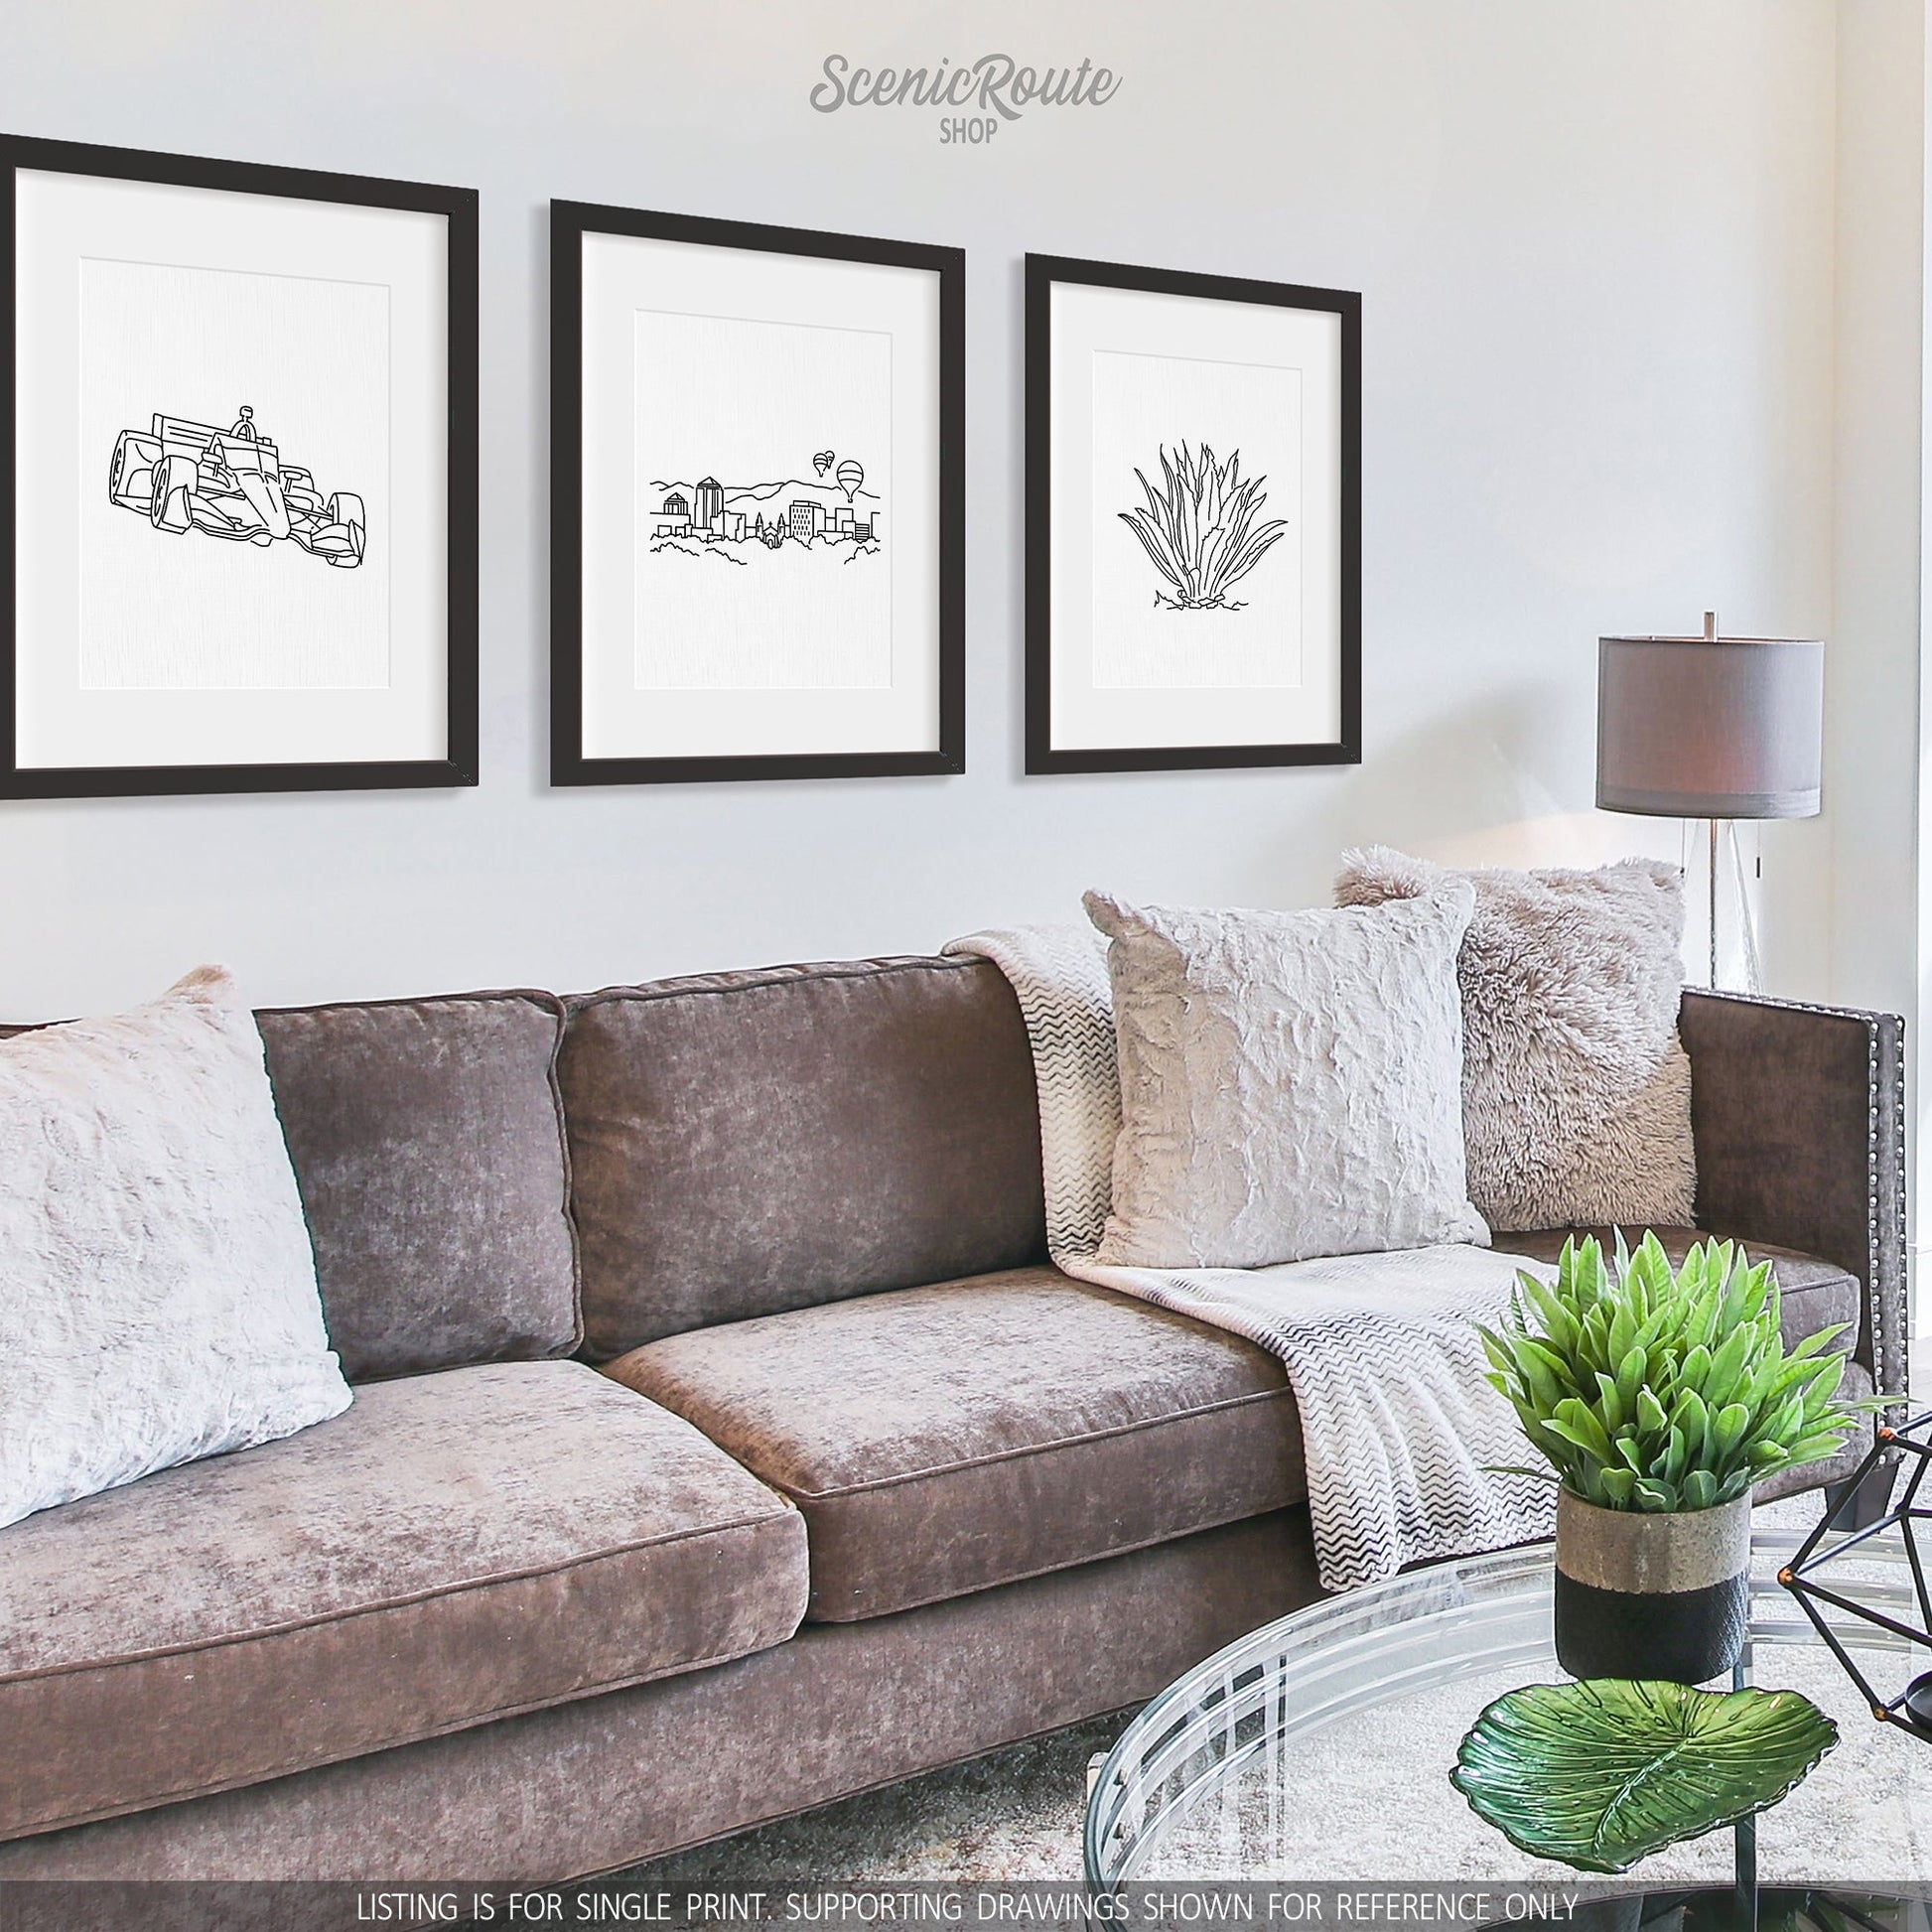 A group of three framed drawings on a white wall hanging above a couch with pillows and a blanket. The line art drawings include an Indy Car, the Albuquerque Skyline, and an Agave Cactus